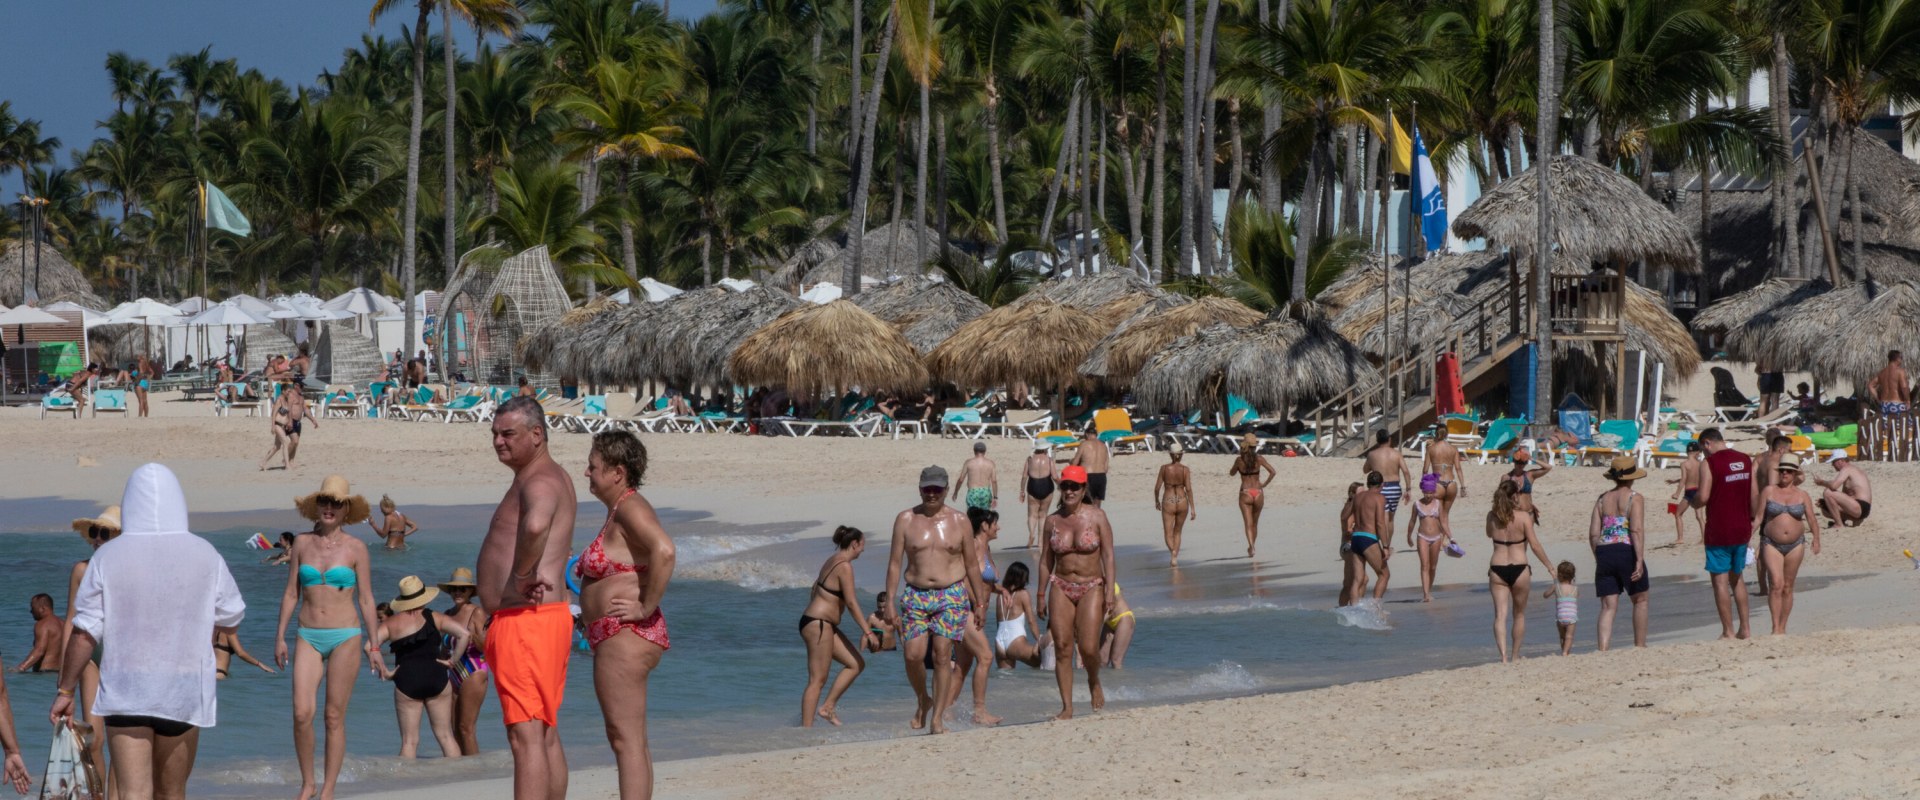 Is it Safe to Travel to Punta Cana During COVID-19?